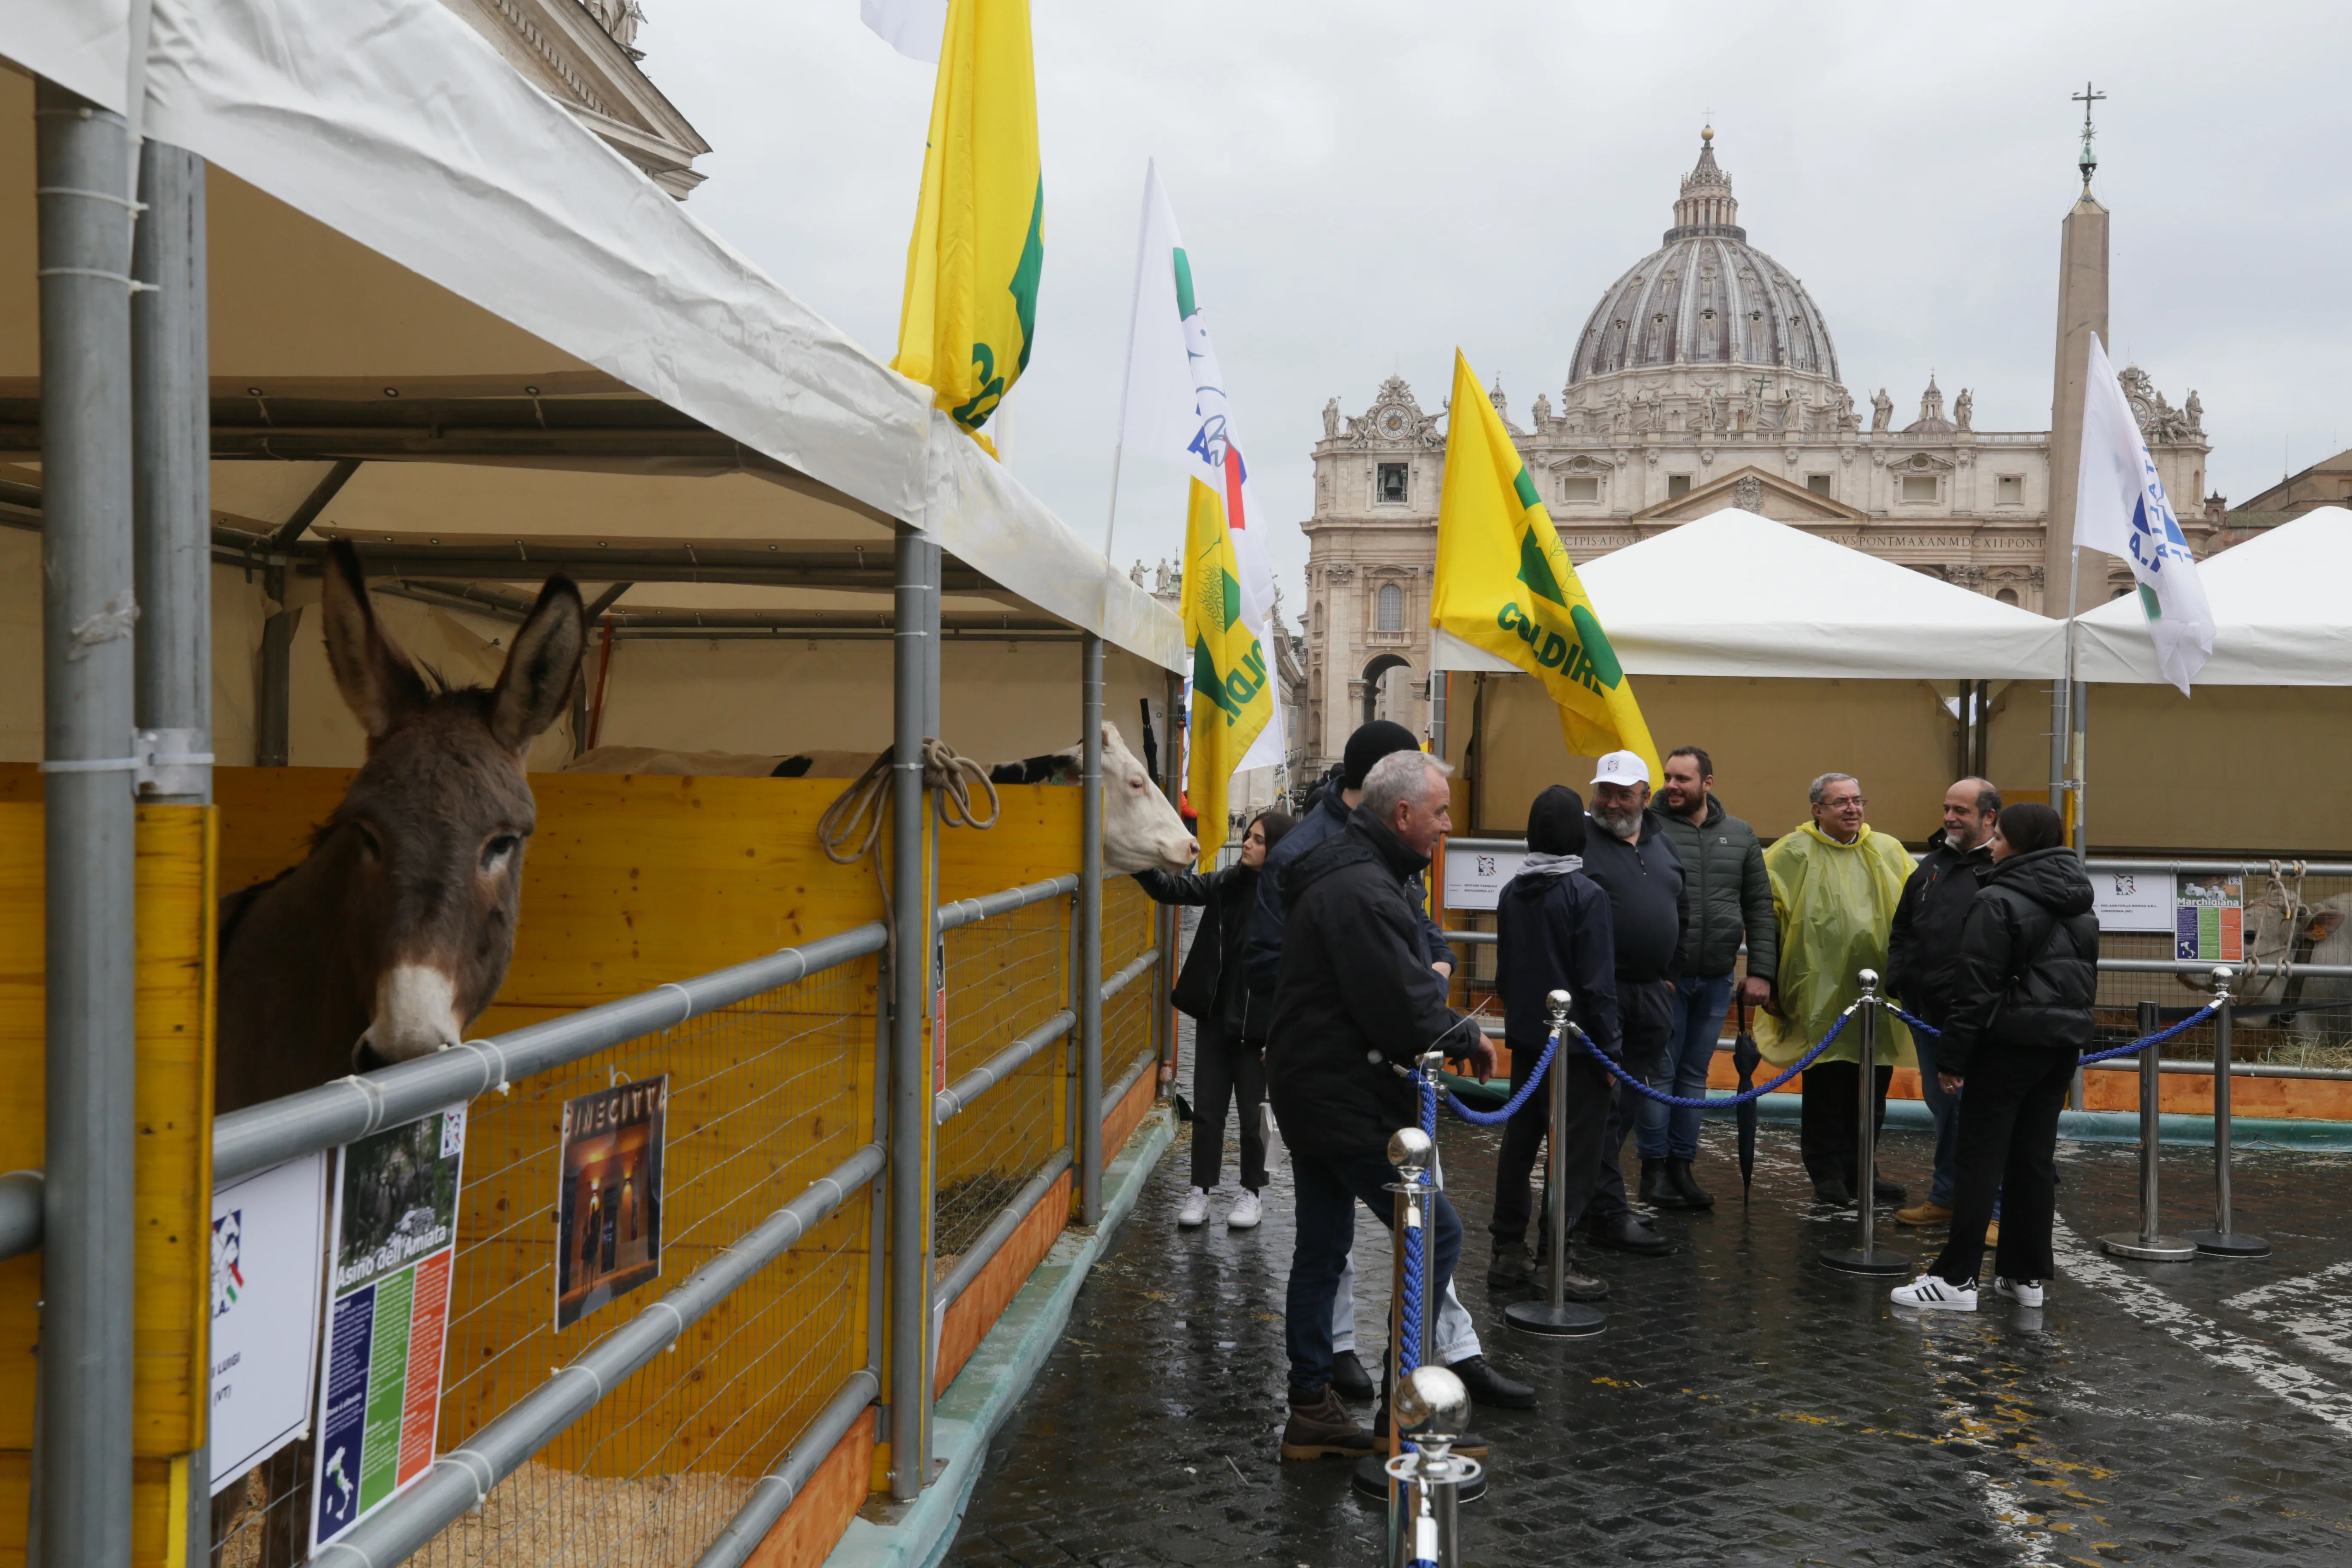 Farmers and pet owners alike brought out their beloved animals to the Vatican for a special blessing on the feast of St. Anthony Abbot, Jan. 17, 2023. Credit: Alan Koppschall/EWTN